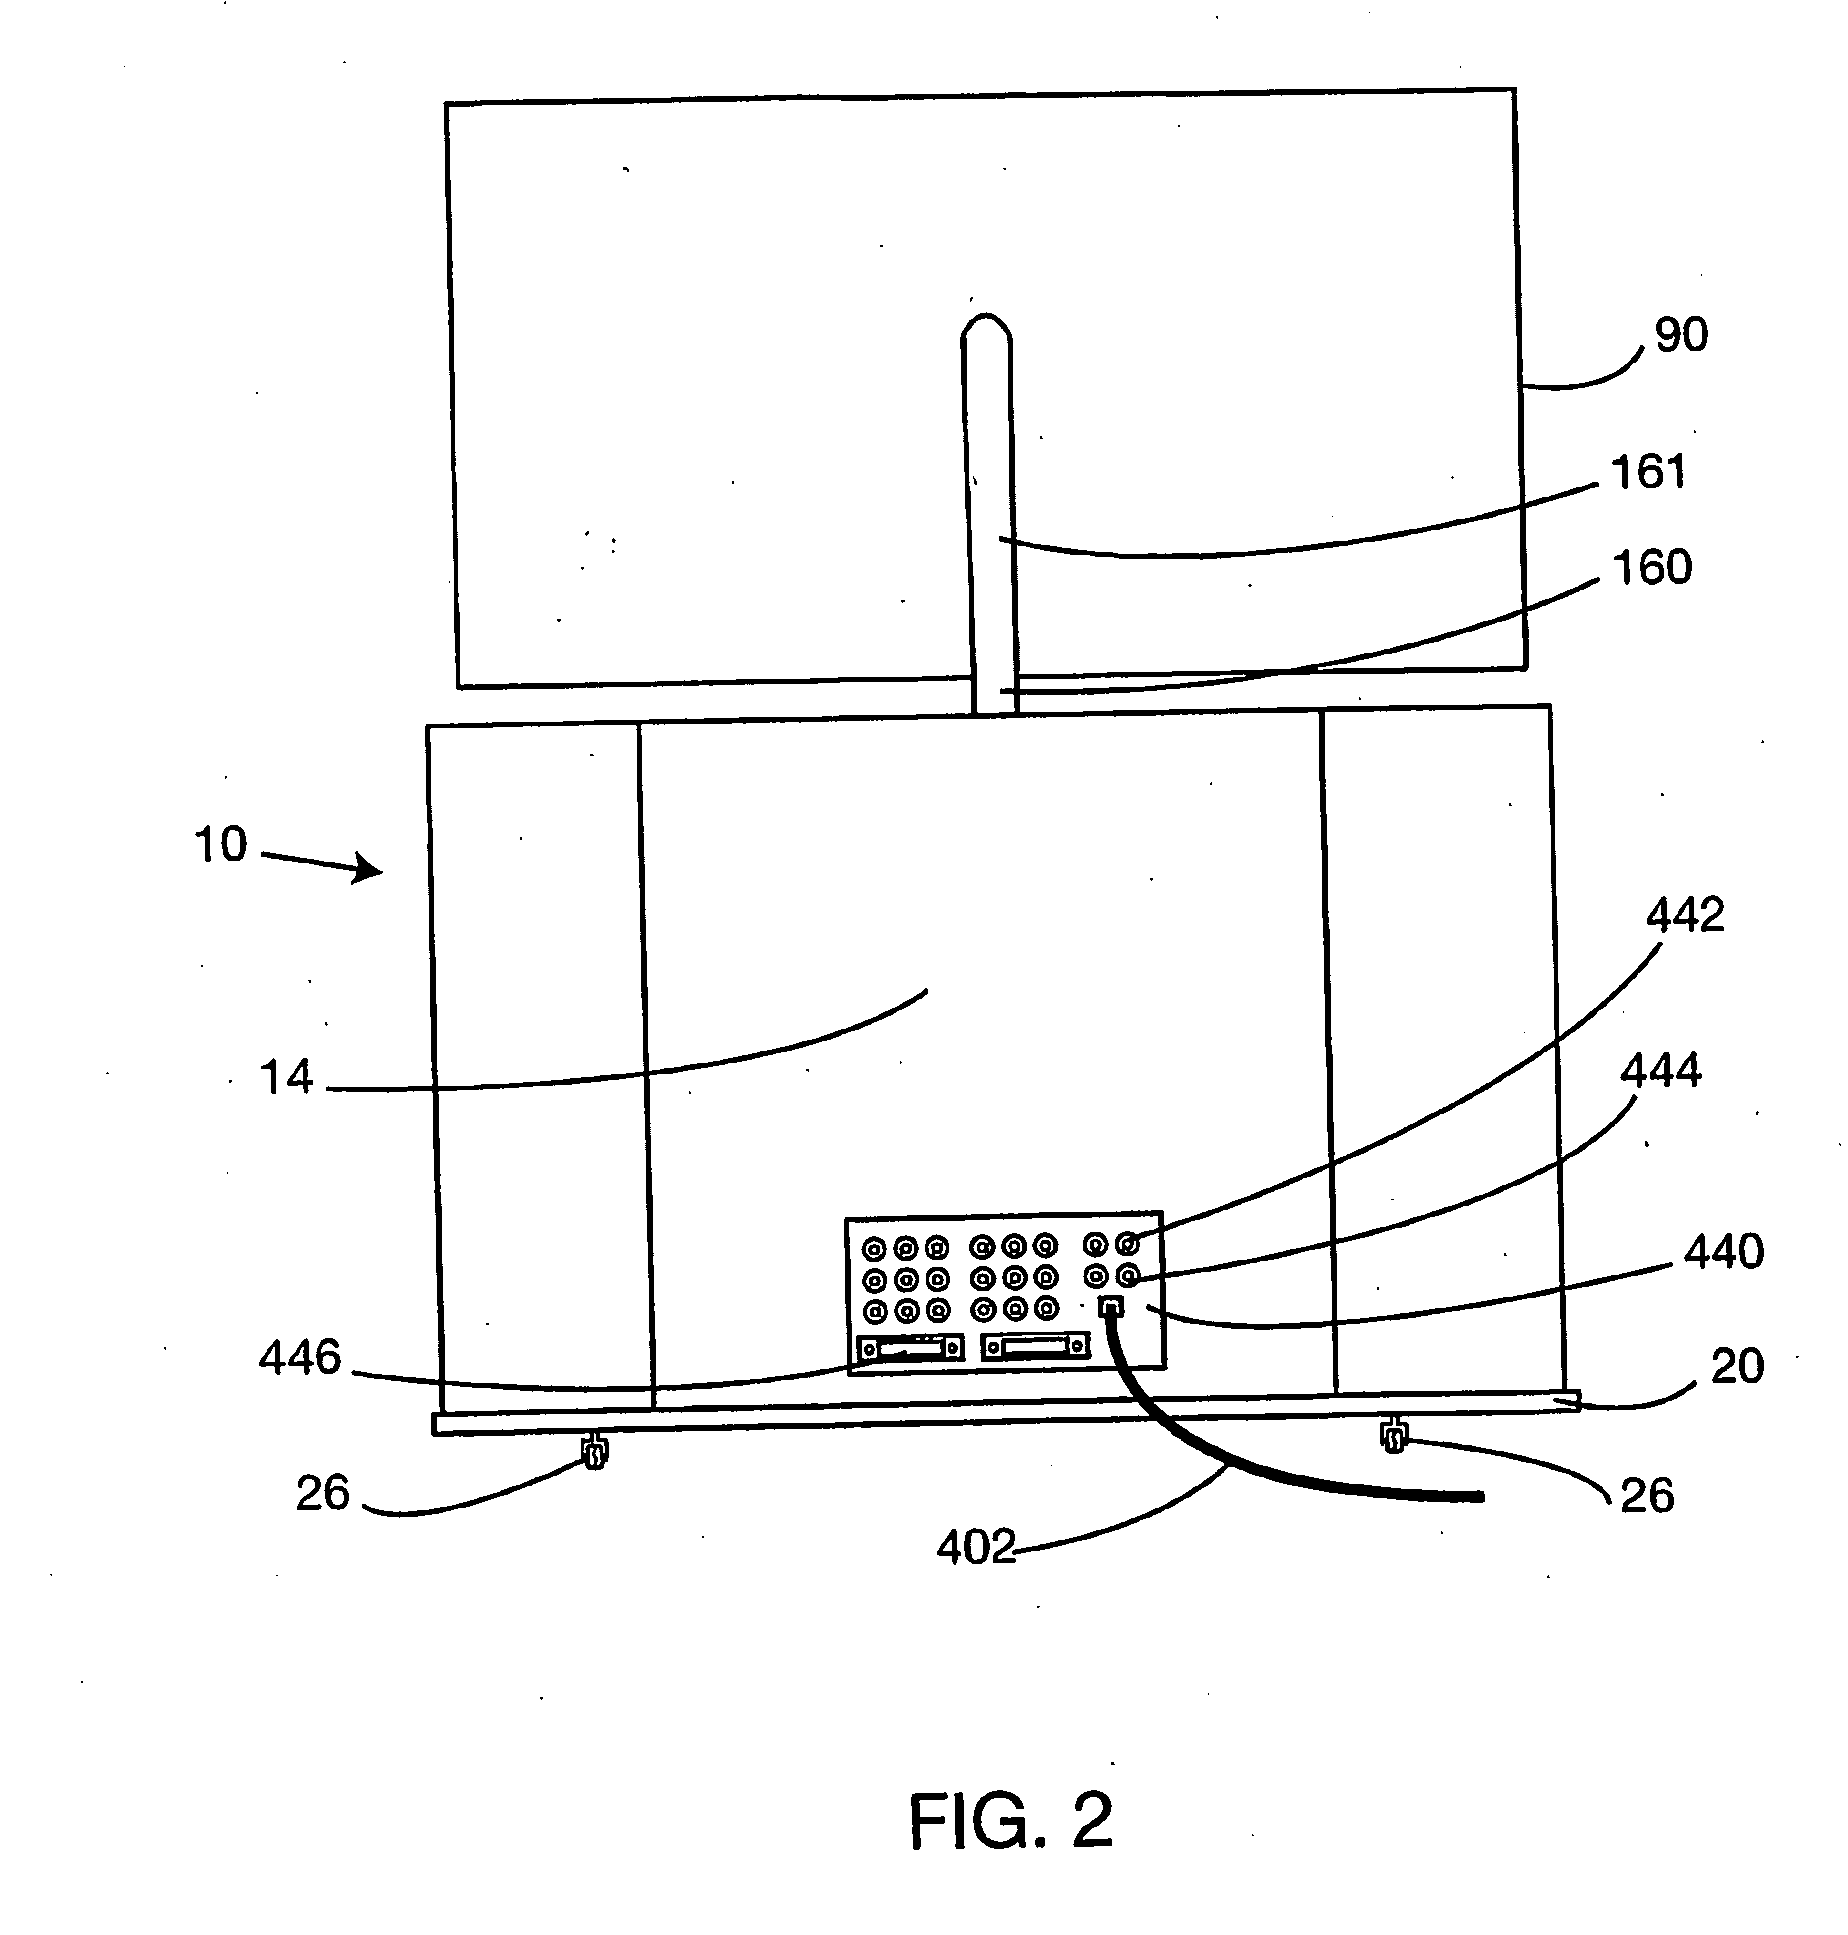 Apparatus for supporting an audio/video system which includes a thin screen video display unit